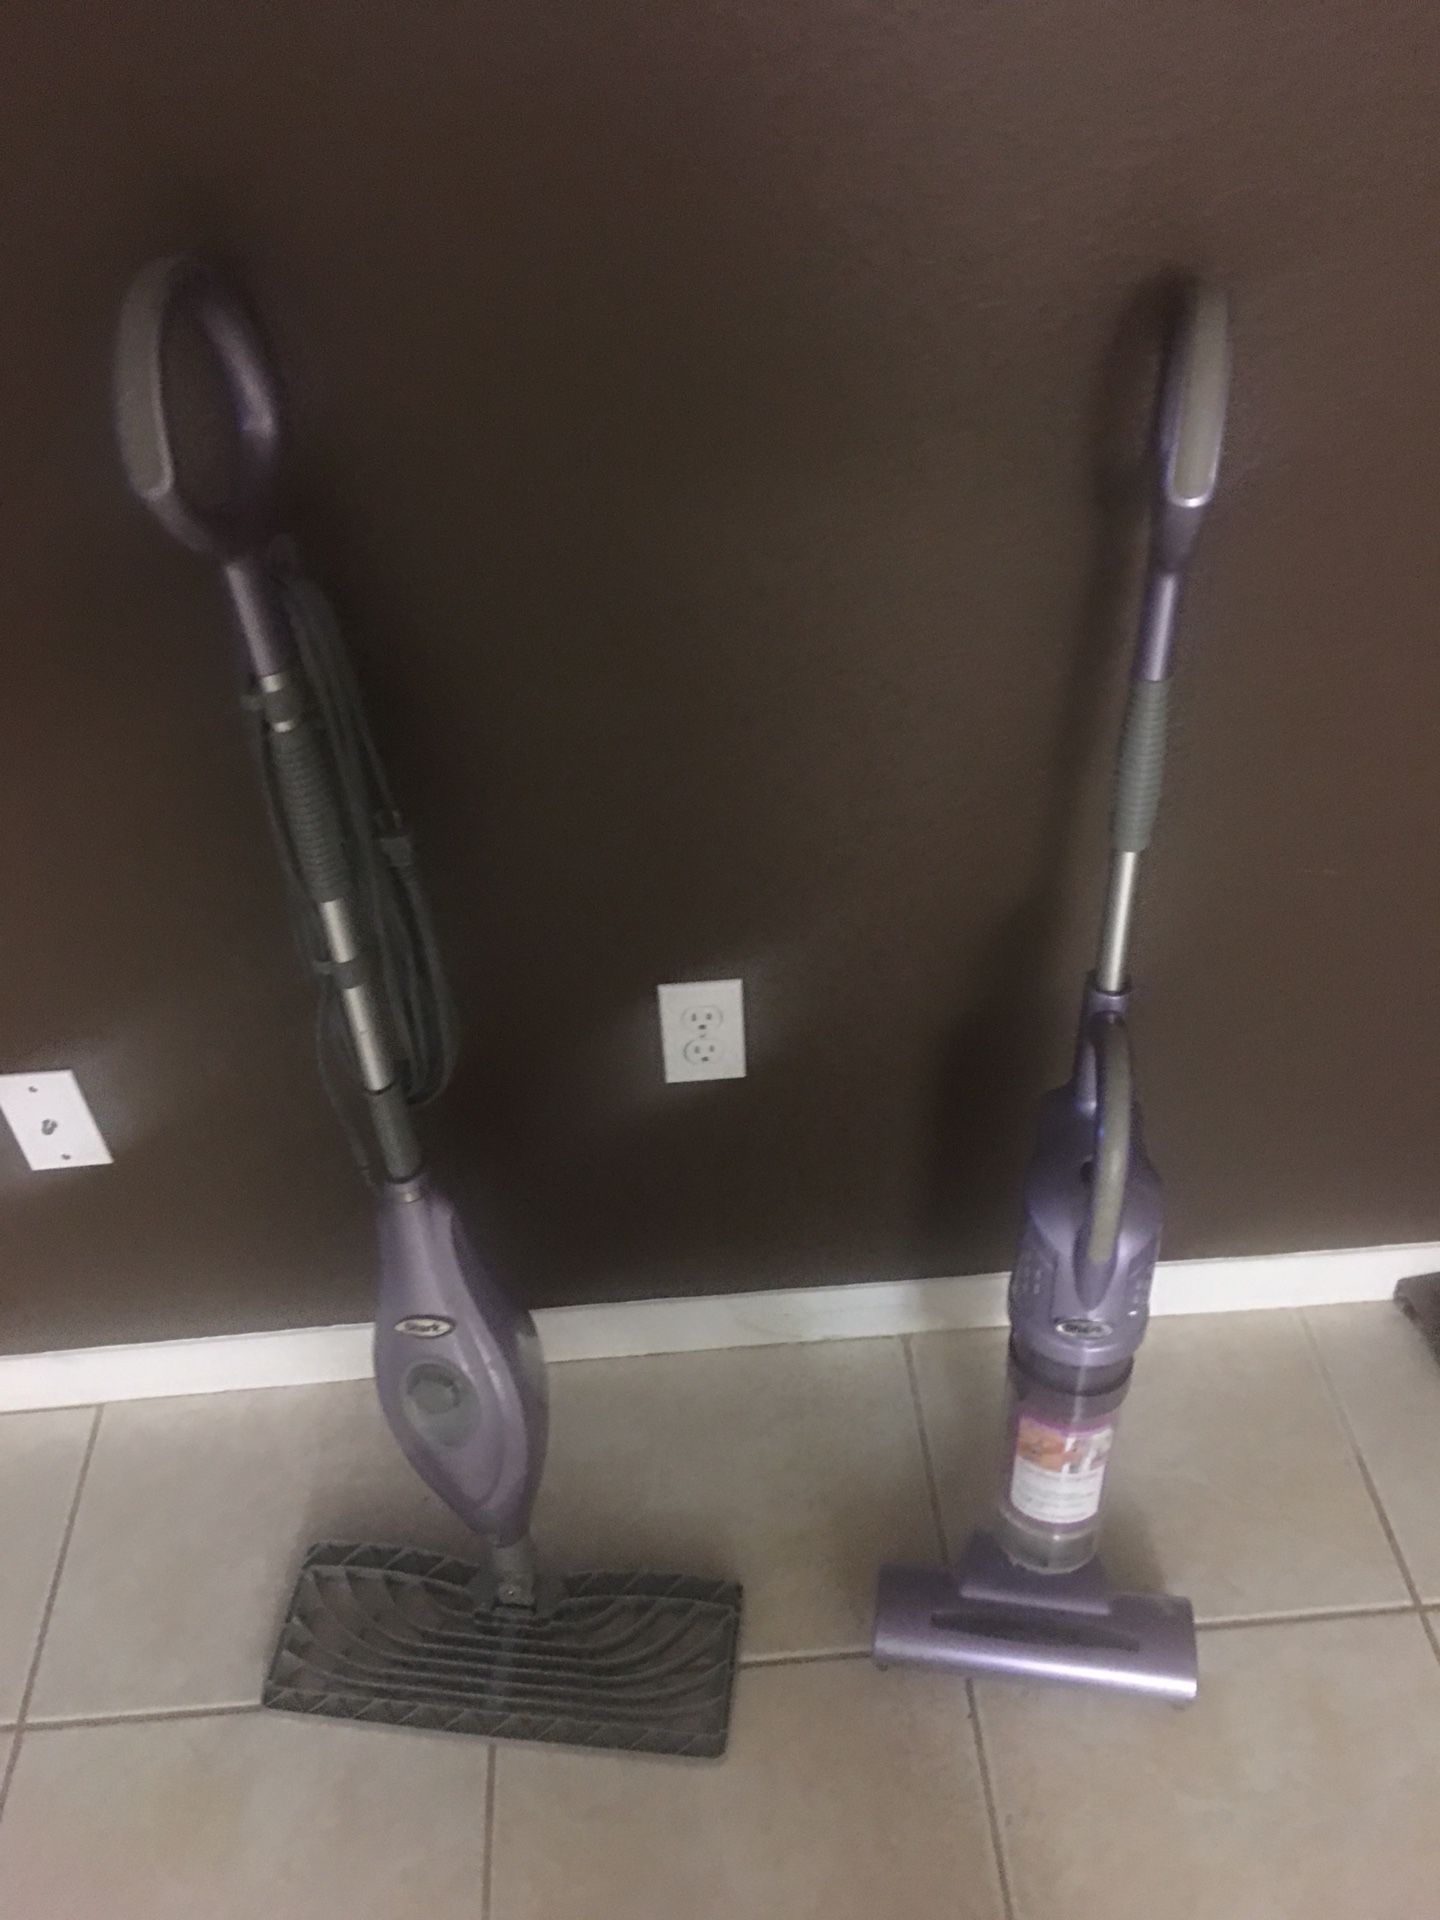 Shark stick vacuum, steam mop, steam pocket and a ton of accessories